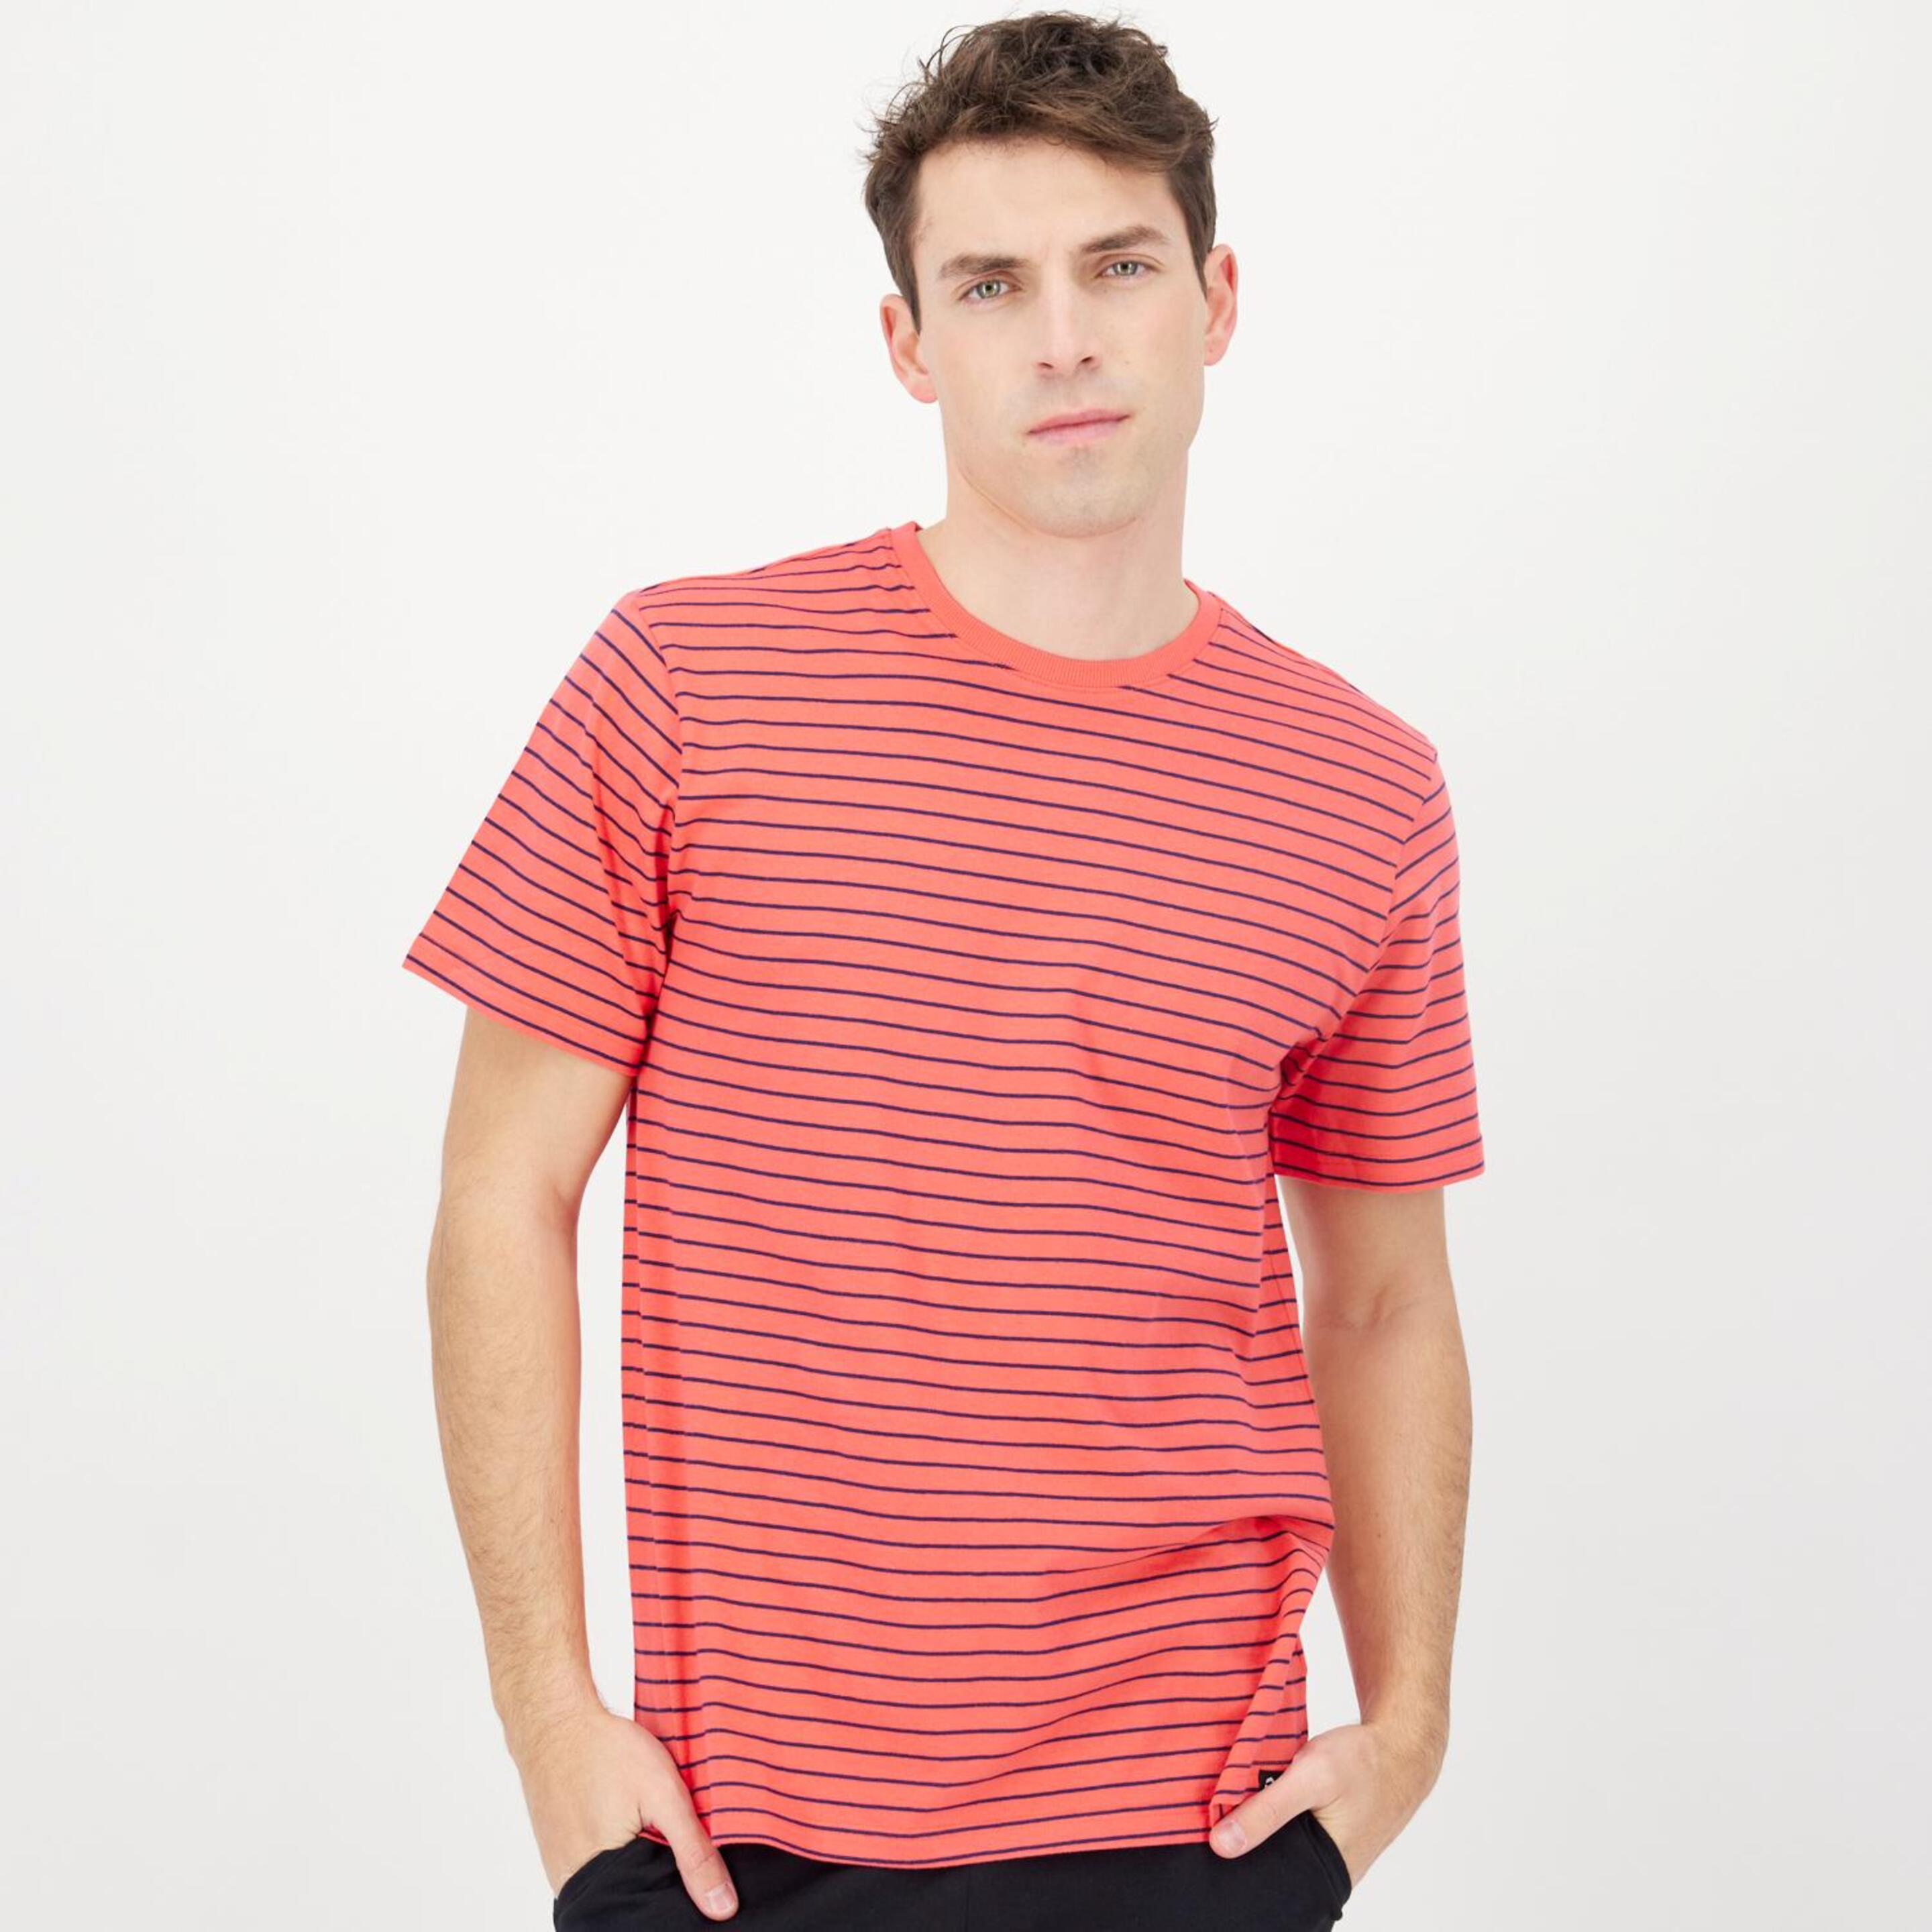 Up Stamps - rojo - Camiseta Hombre